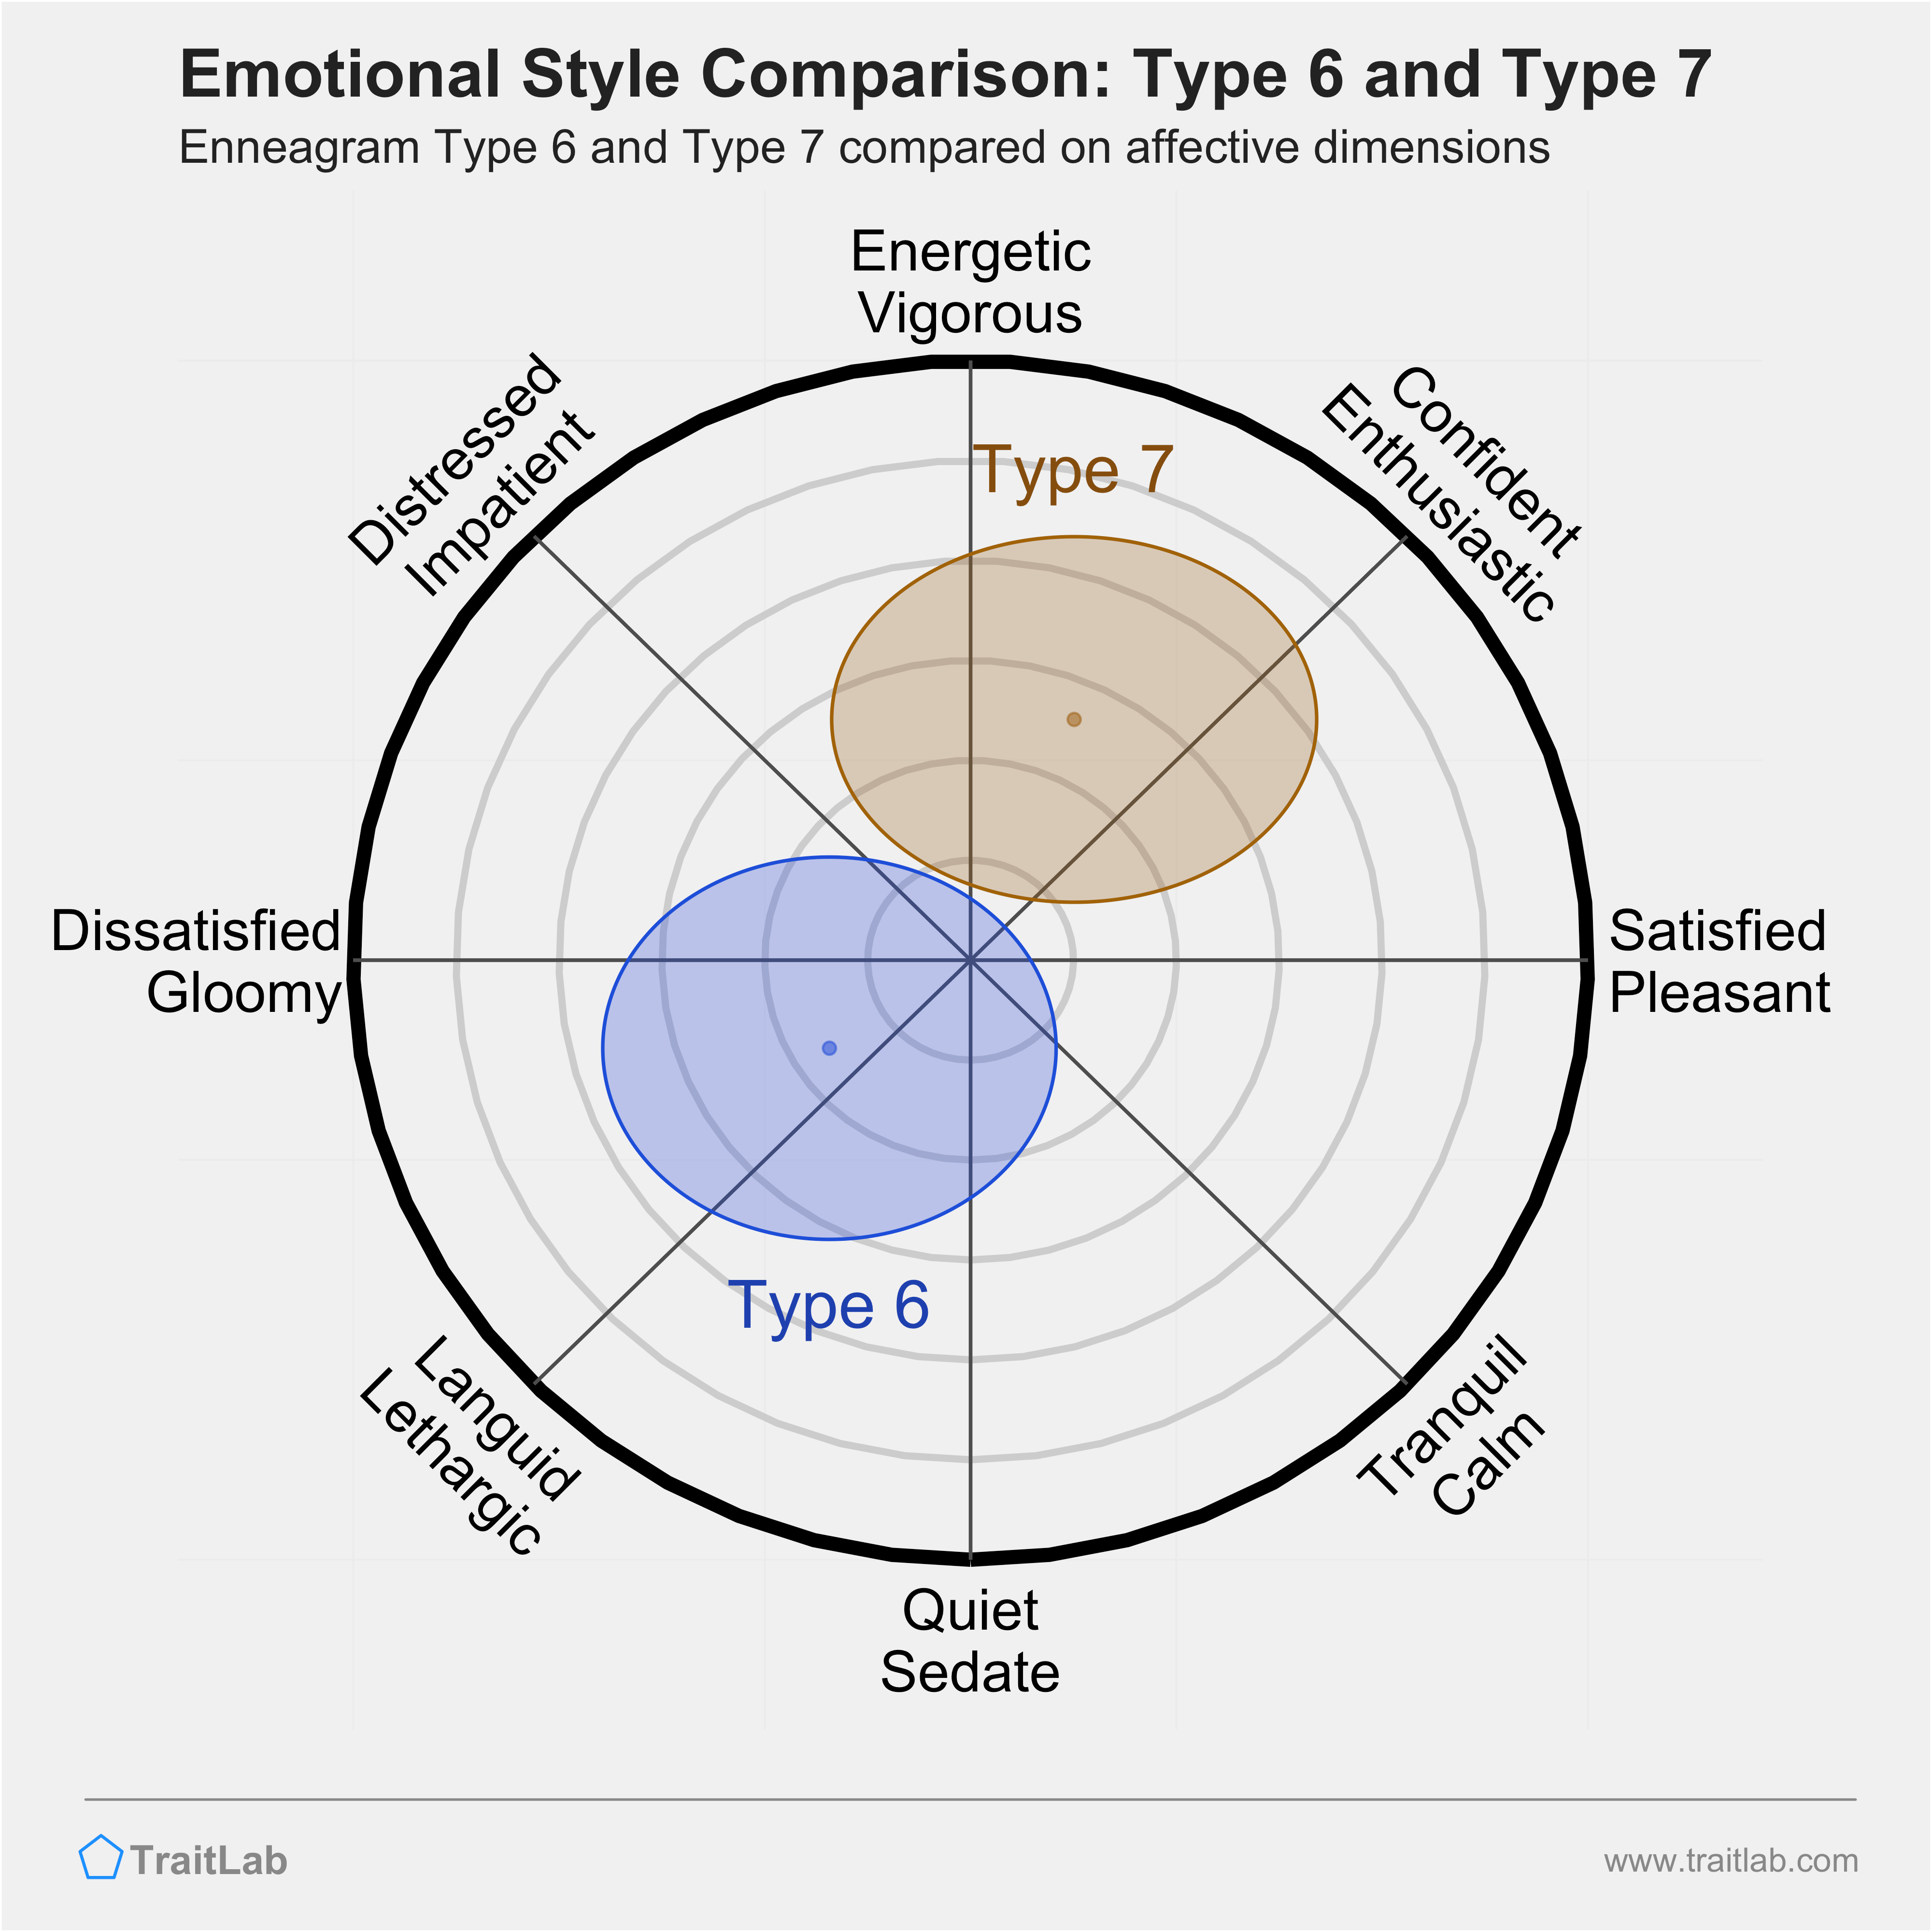 Type 6 and Type 7 comparison across emotional (affective) dimensions